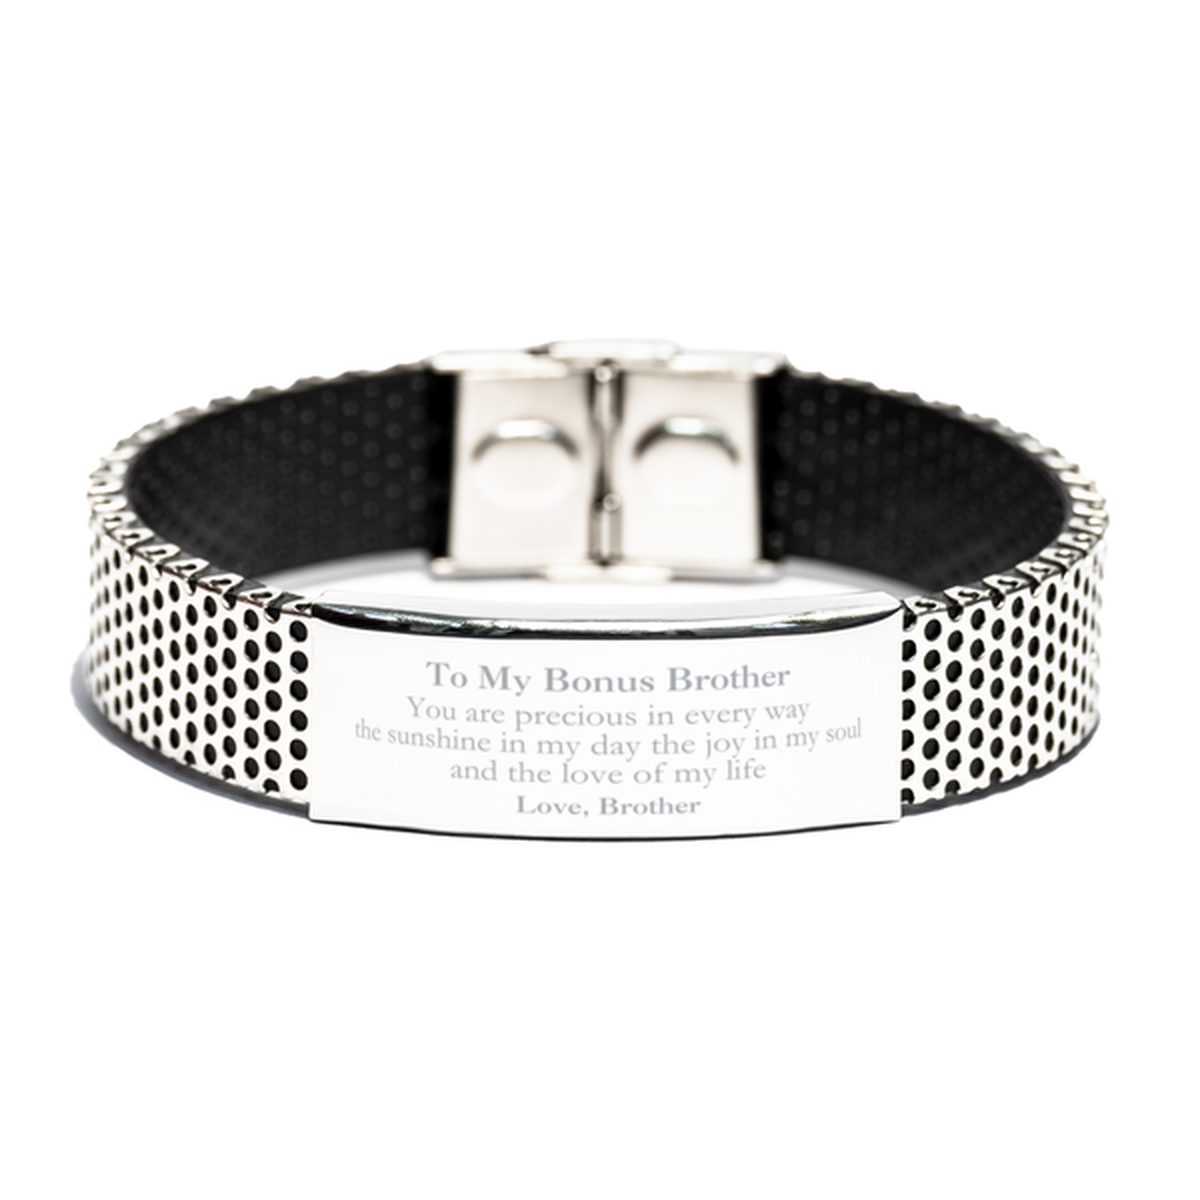 Graduation Gifts for Bonus Brother Stainless Steel Bracelet Present from Brother, Christmas Bonus Brother Birthday Gifts Bonus Brother You are precious in every way the sunshine in my day. Love, Brother